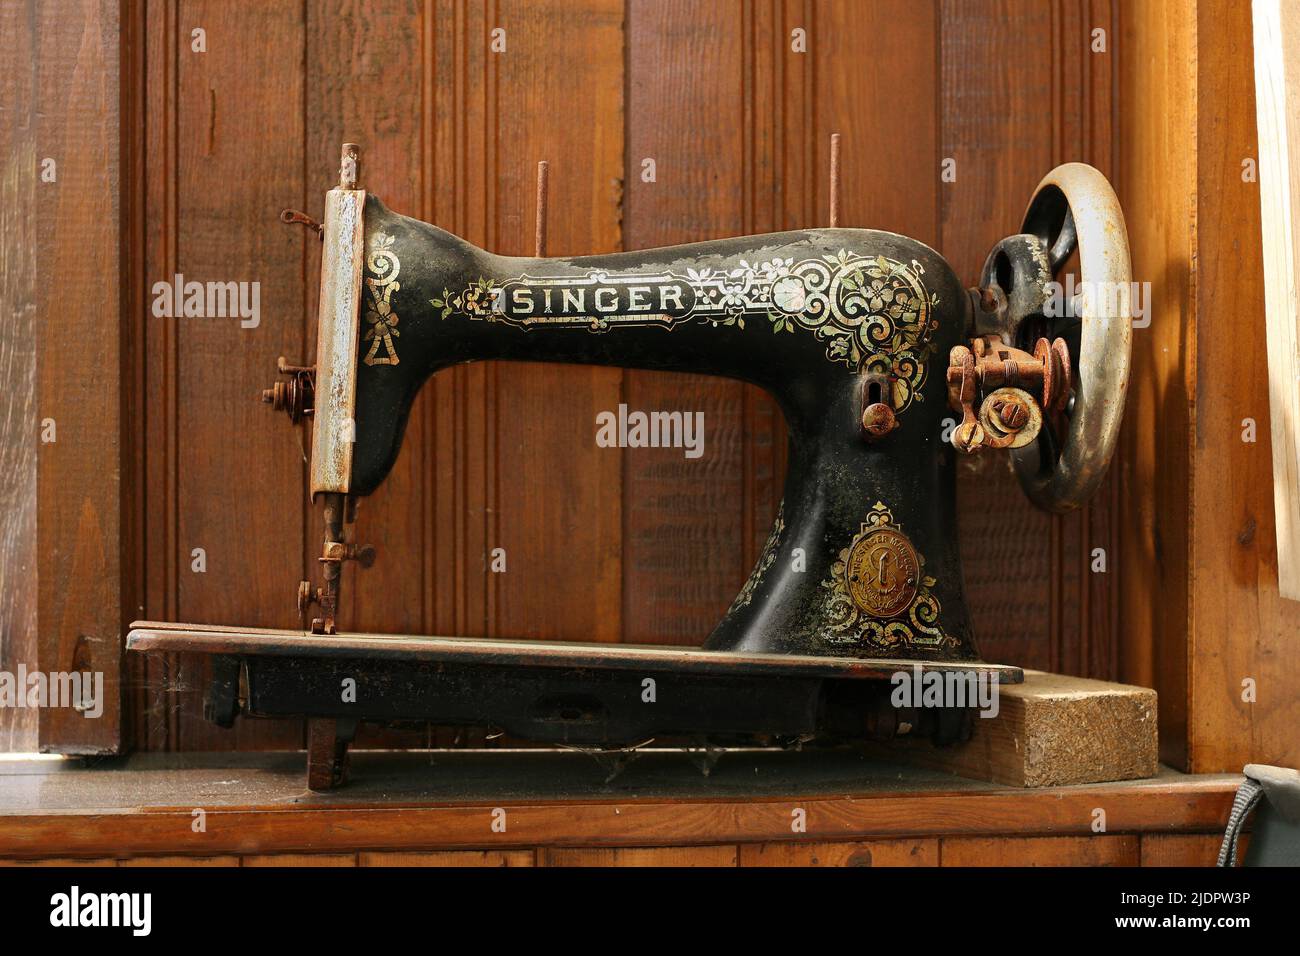 Germany, Lower Saxony, Hambuehren, 23 of April 2022. Antique hand sewing machine SINGER. Very old, dusty, broken covered with cobweb sewing machine Stock Photo